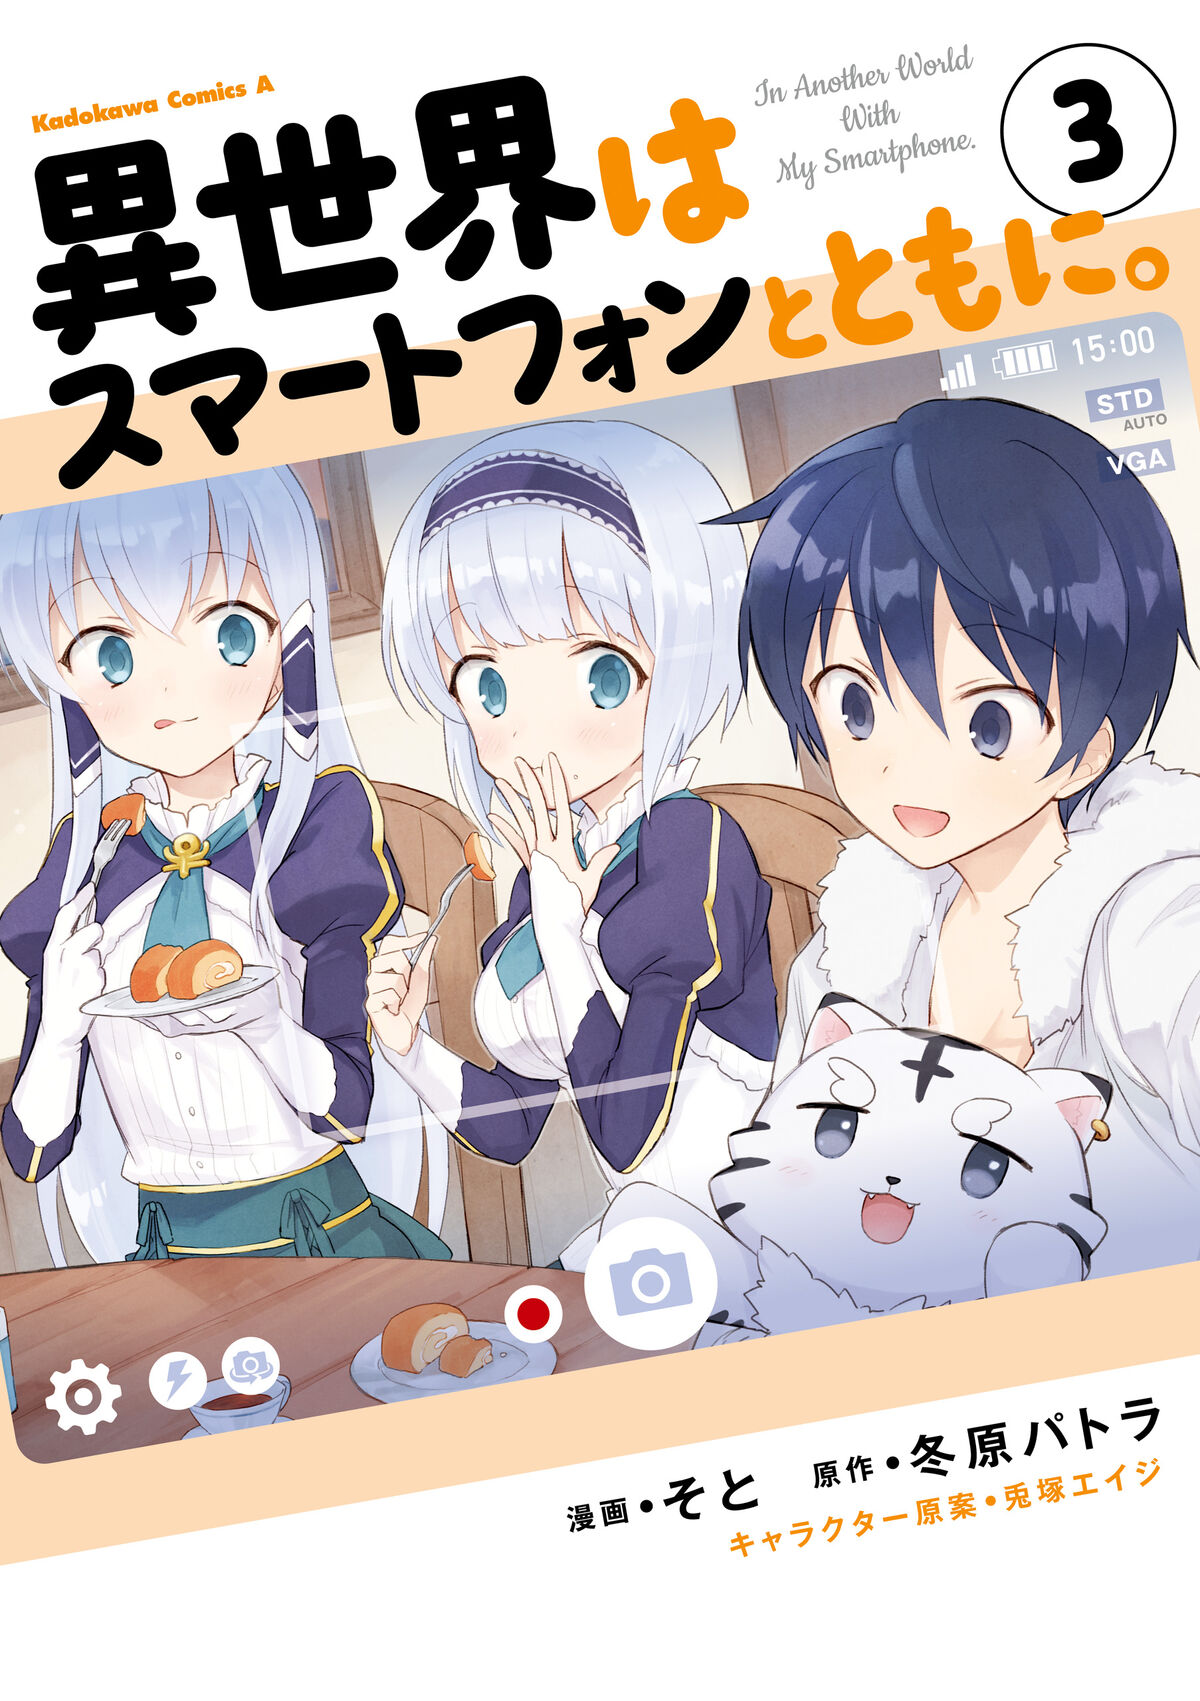 Light Novel Volume 26, In Another World With My Smartphone Wiki